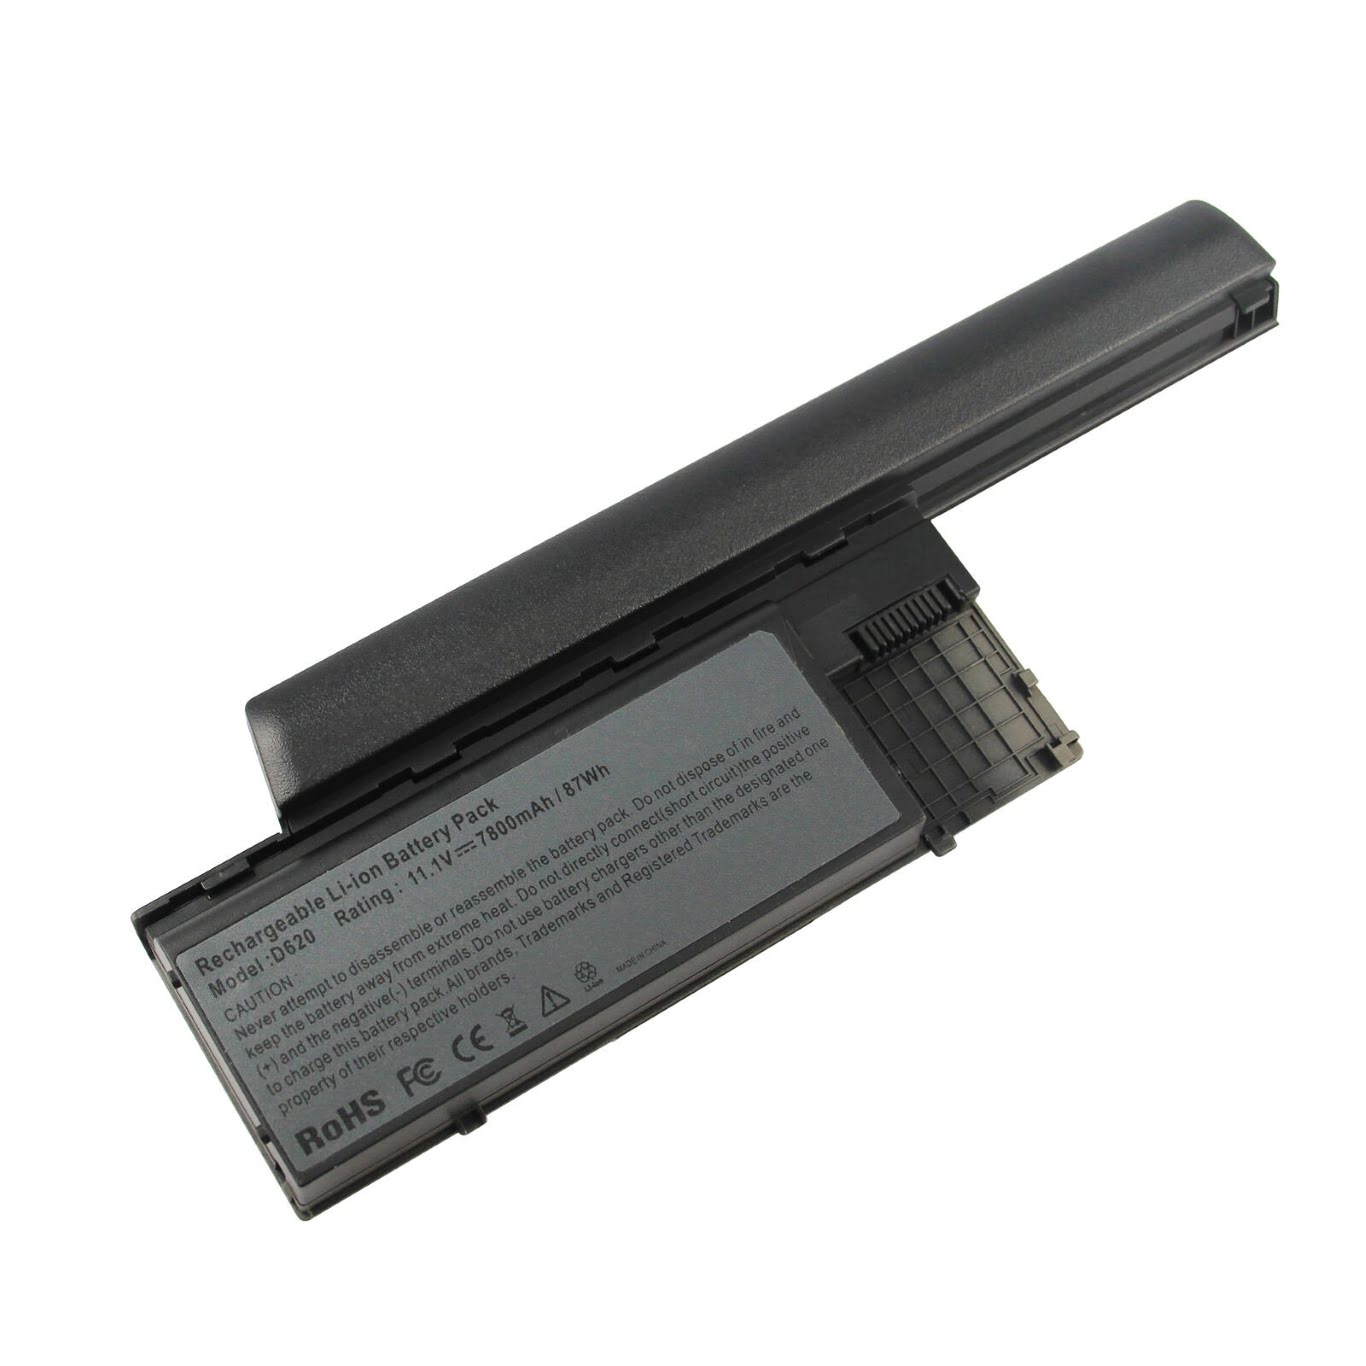 0GD787, 0JD605 replacement Laptop Battery for Dell Latitude D620, Latitude D630, 11.1 V, 9 cells, 7800mAh